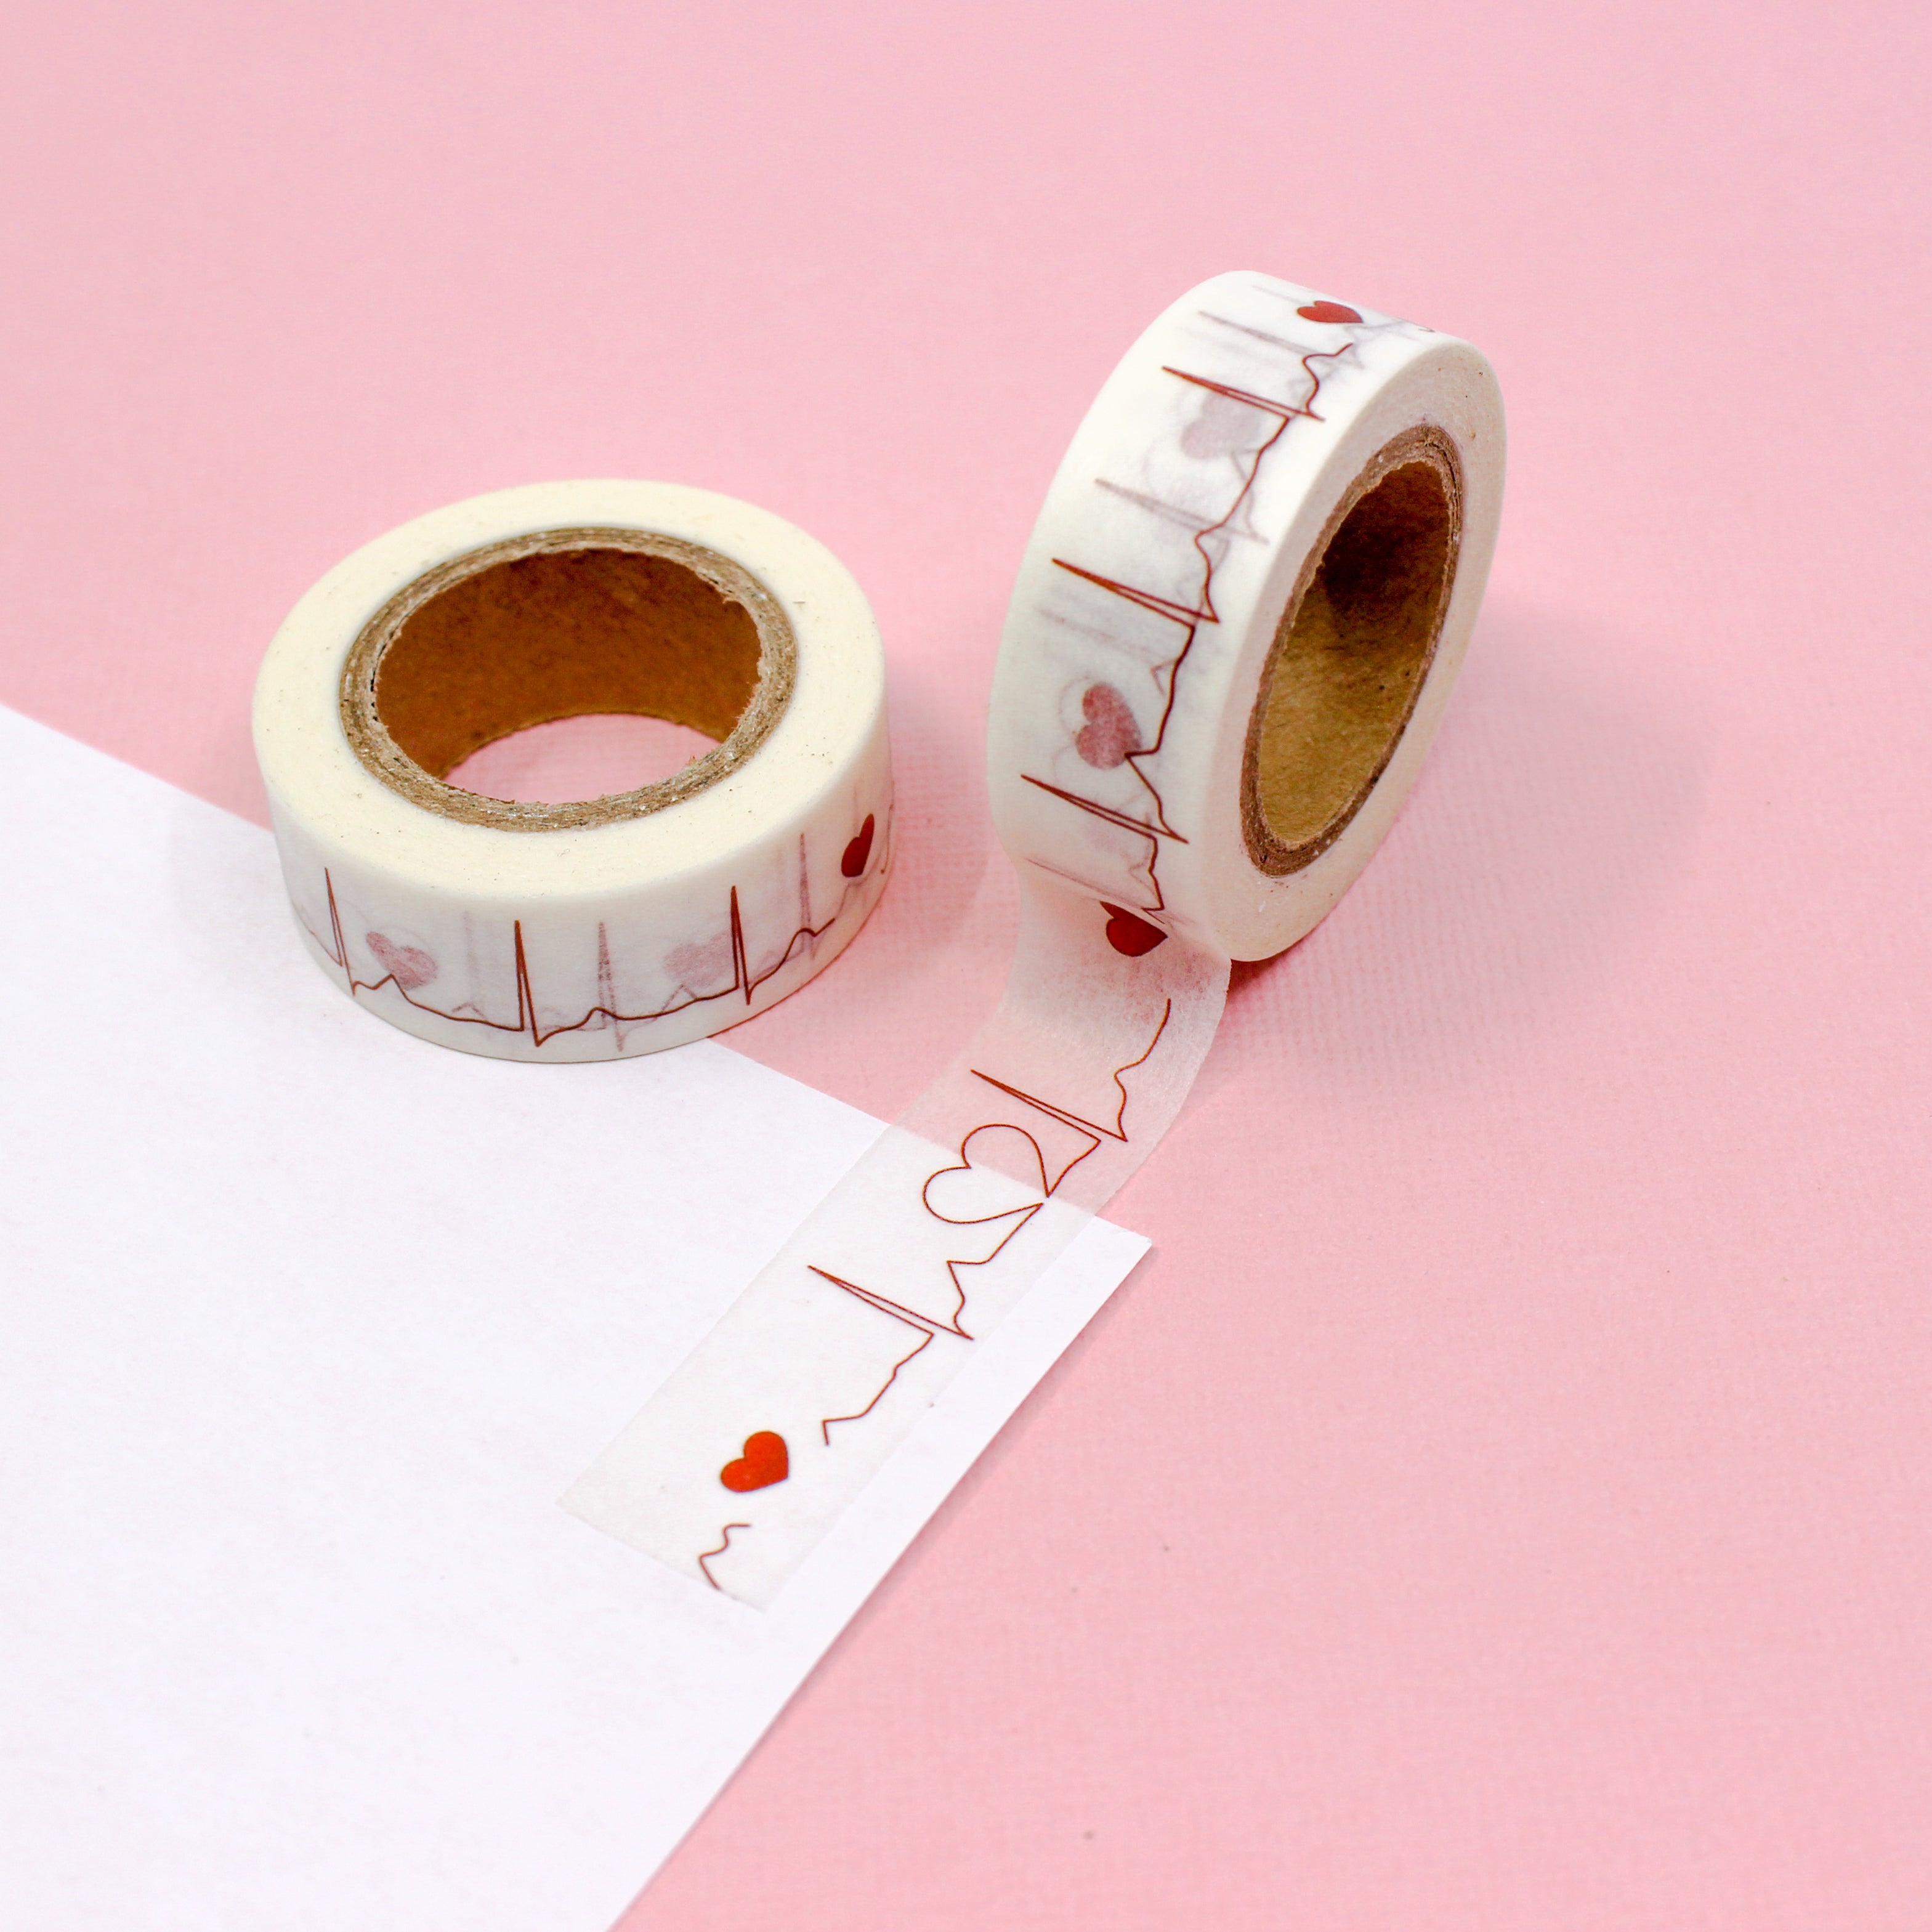 This is a cute heart beat pattern washi tape from BBB Supplies Craft Shop